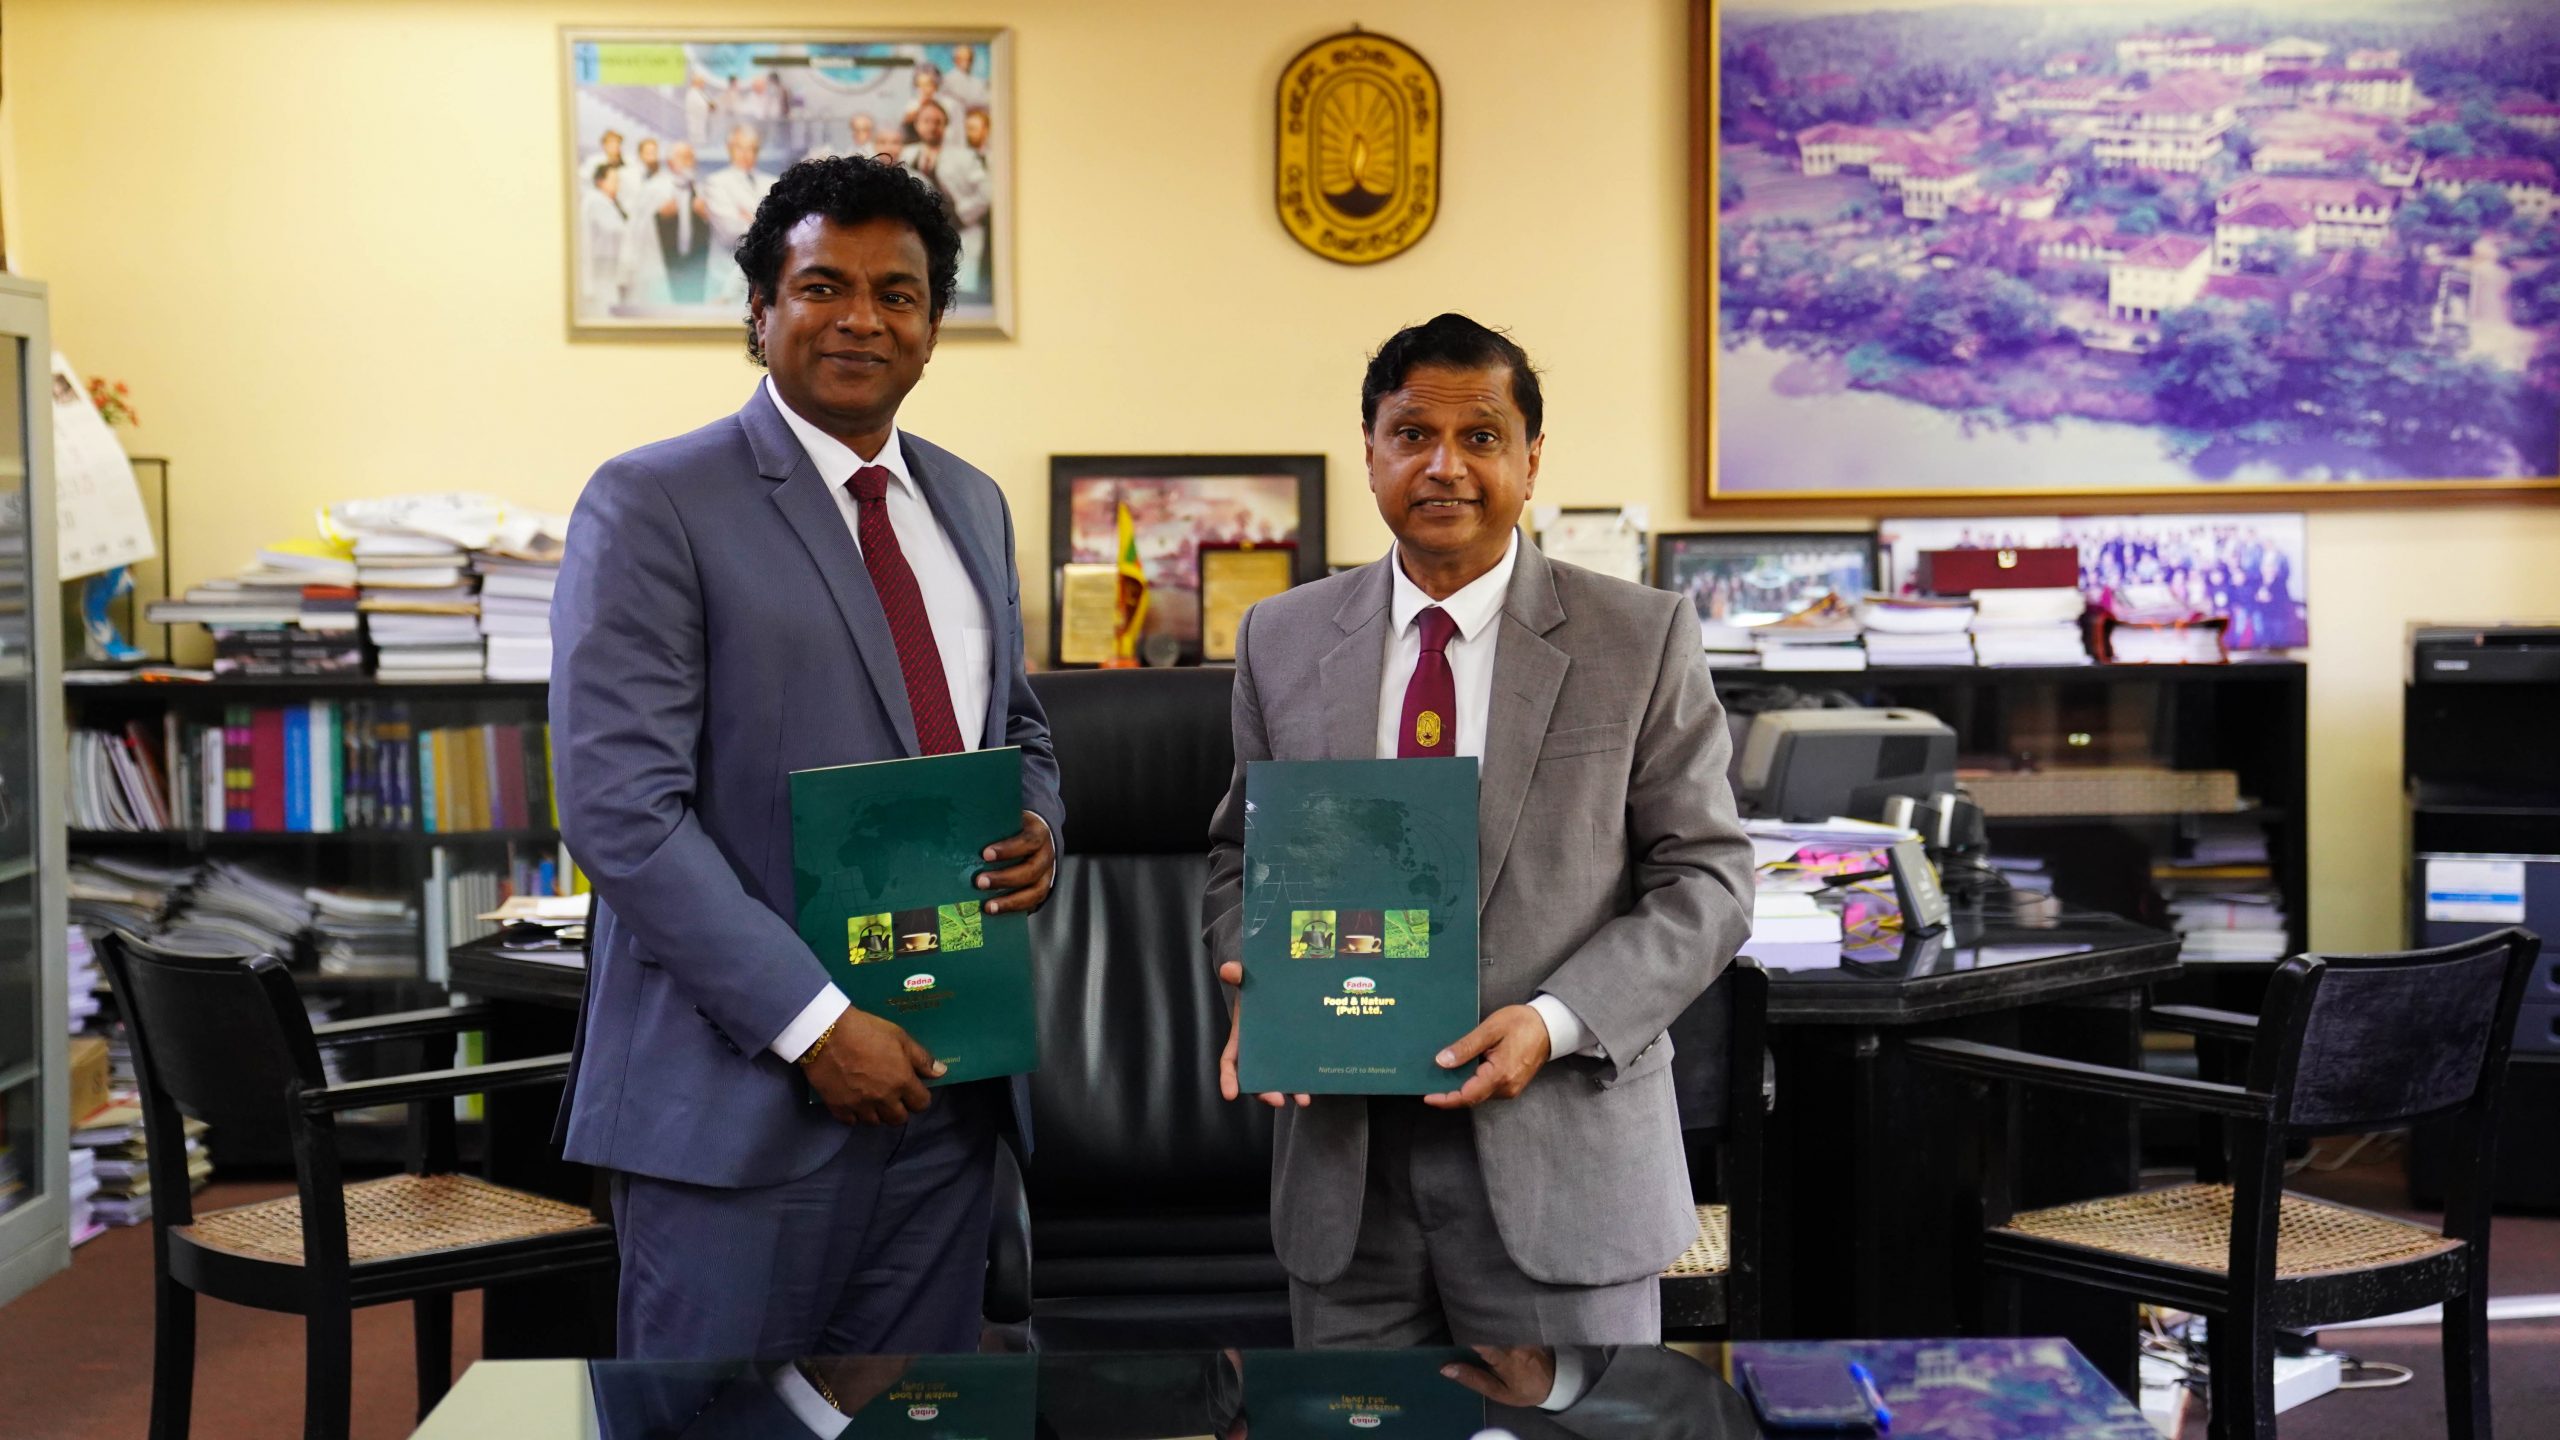 FADNA signs an MoU with University of Ruhuna